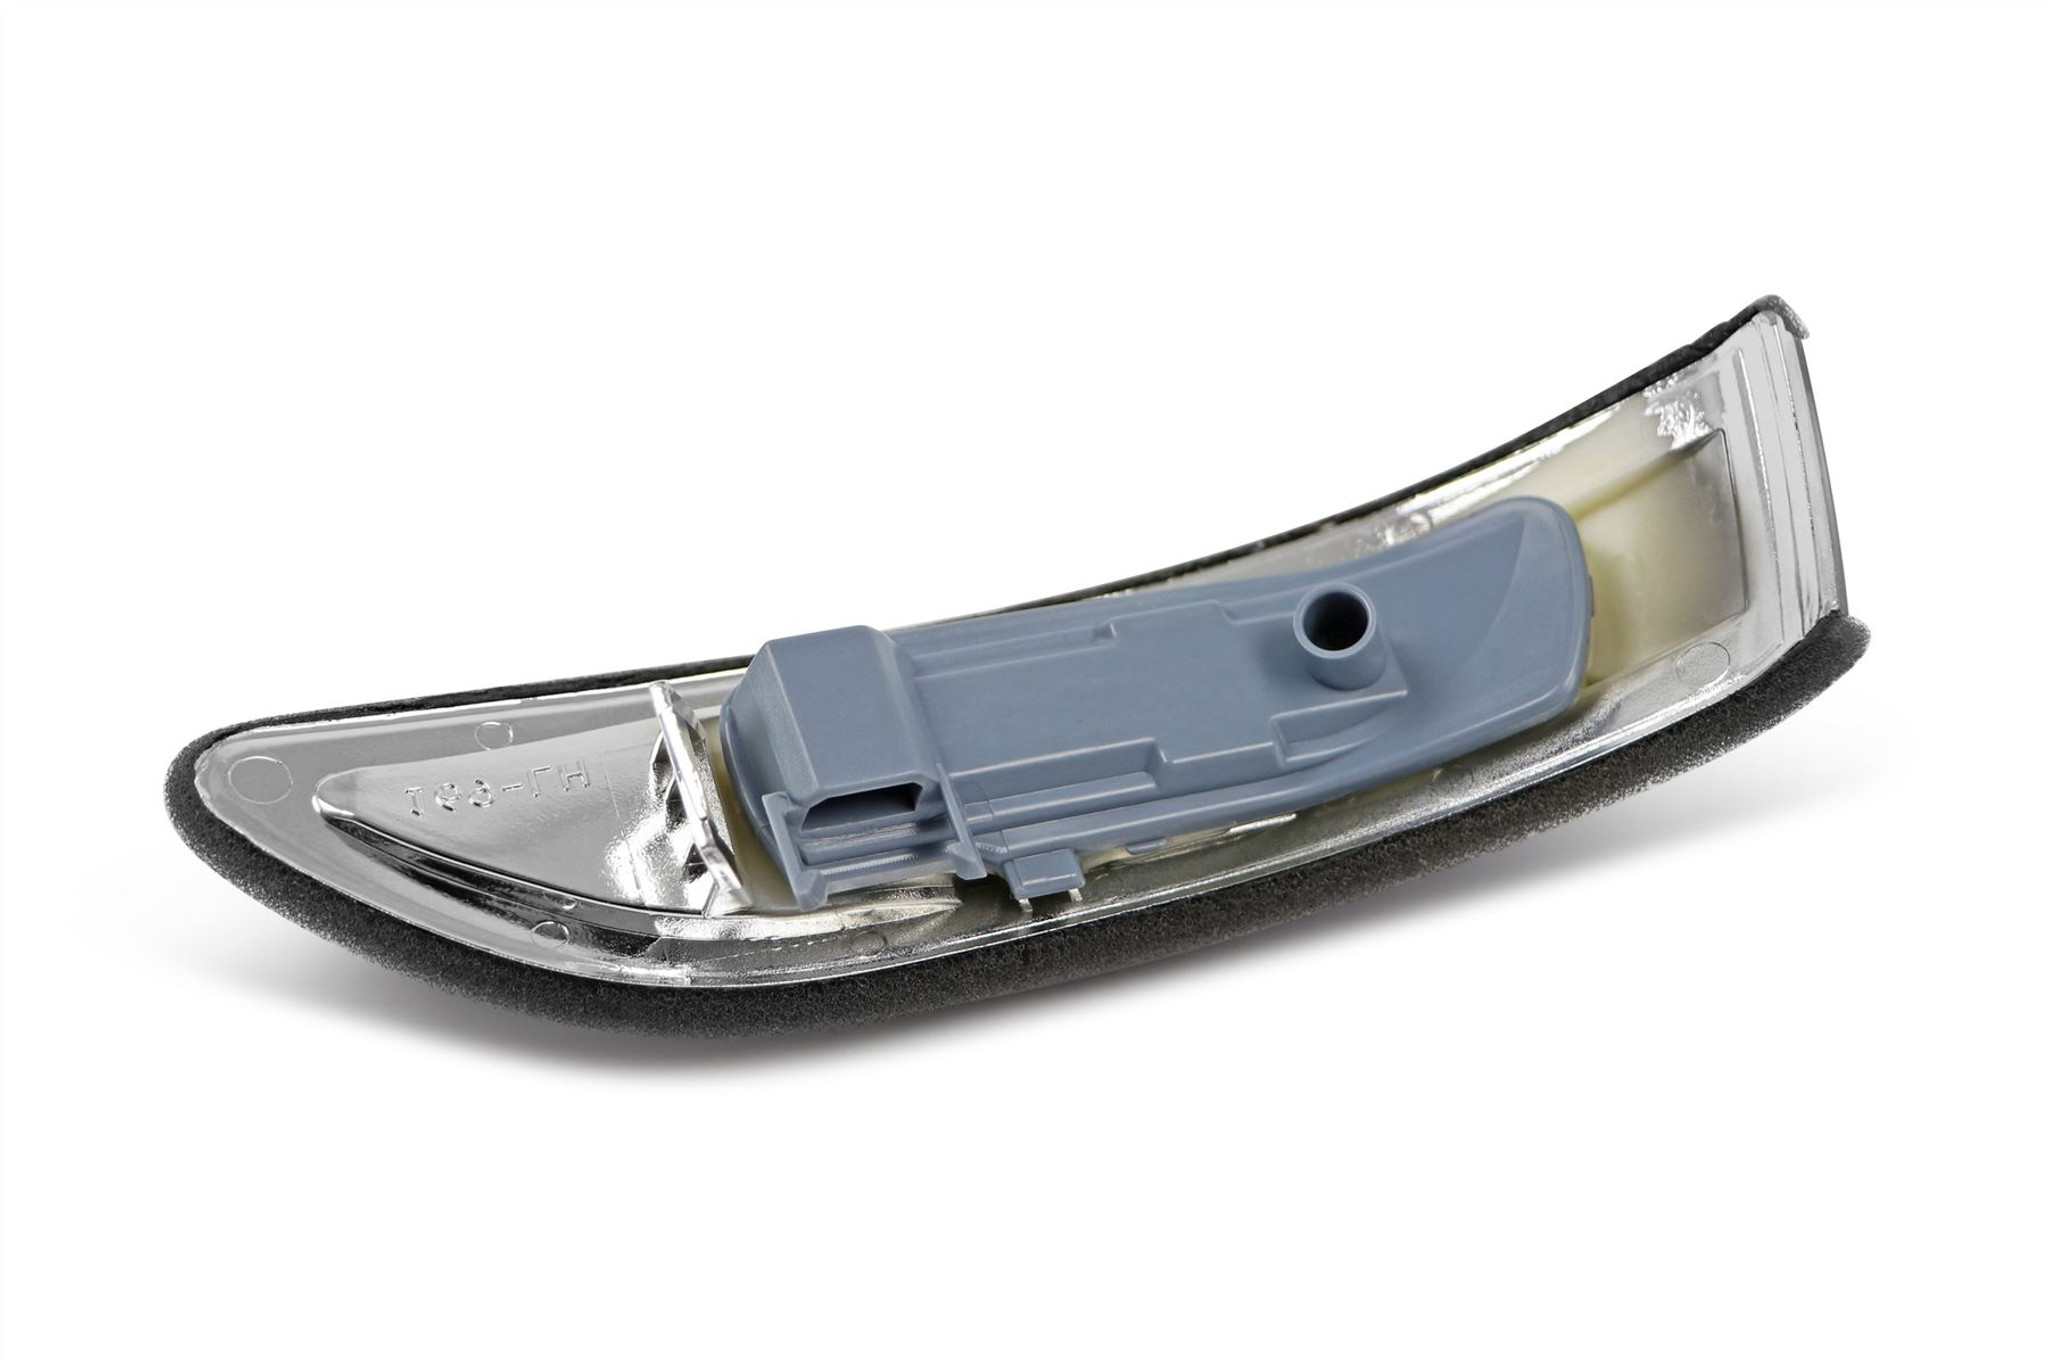 Eurowagens 632810170L.1 Mirror Indicator Left Compatible With Mercedes-Benz B Class W245 05-08 OEM